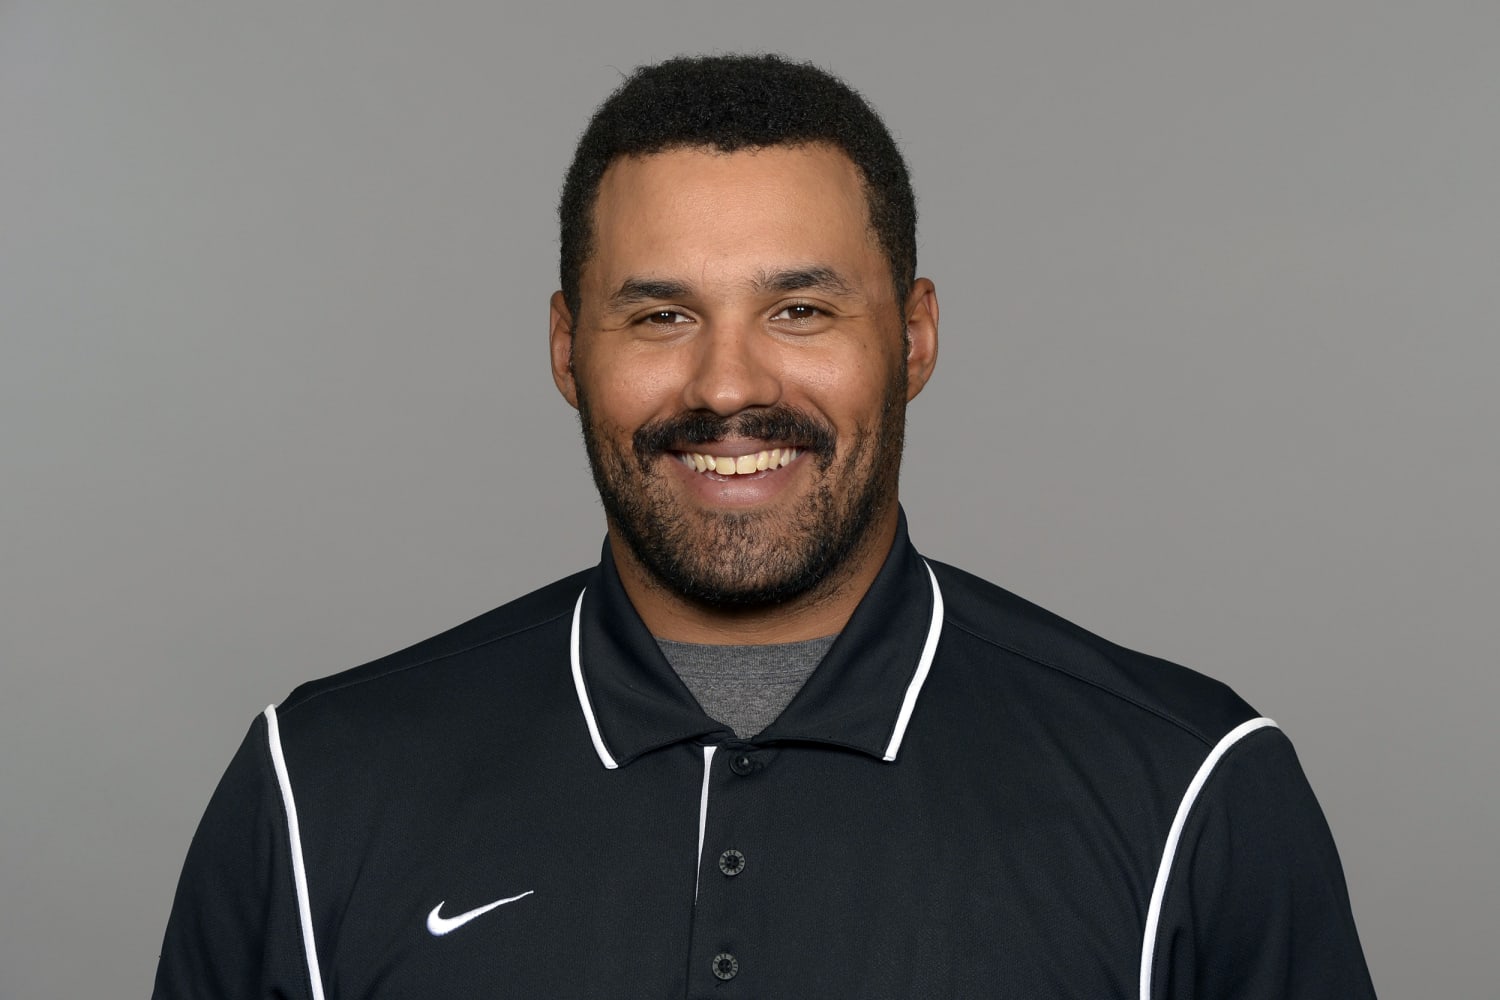 Jacksonville Jaguars coach becomes first professional male coach to come out as gay